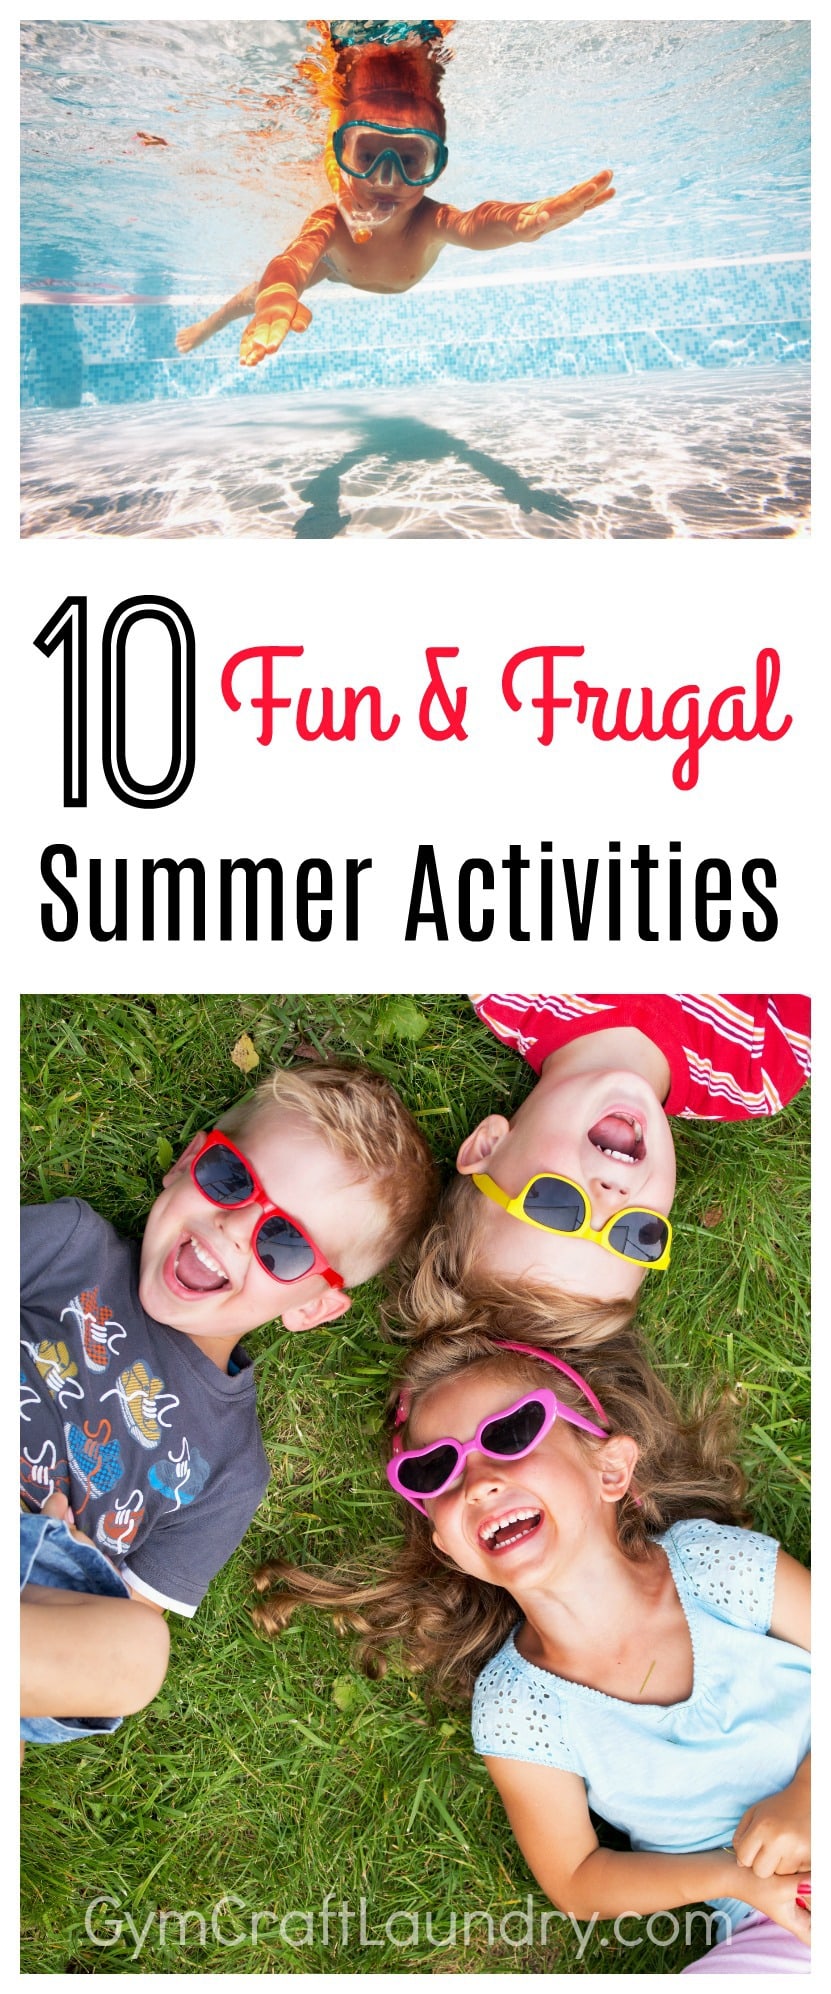 10 fun and frugal summer activities